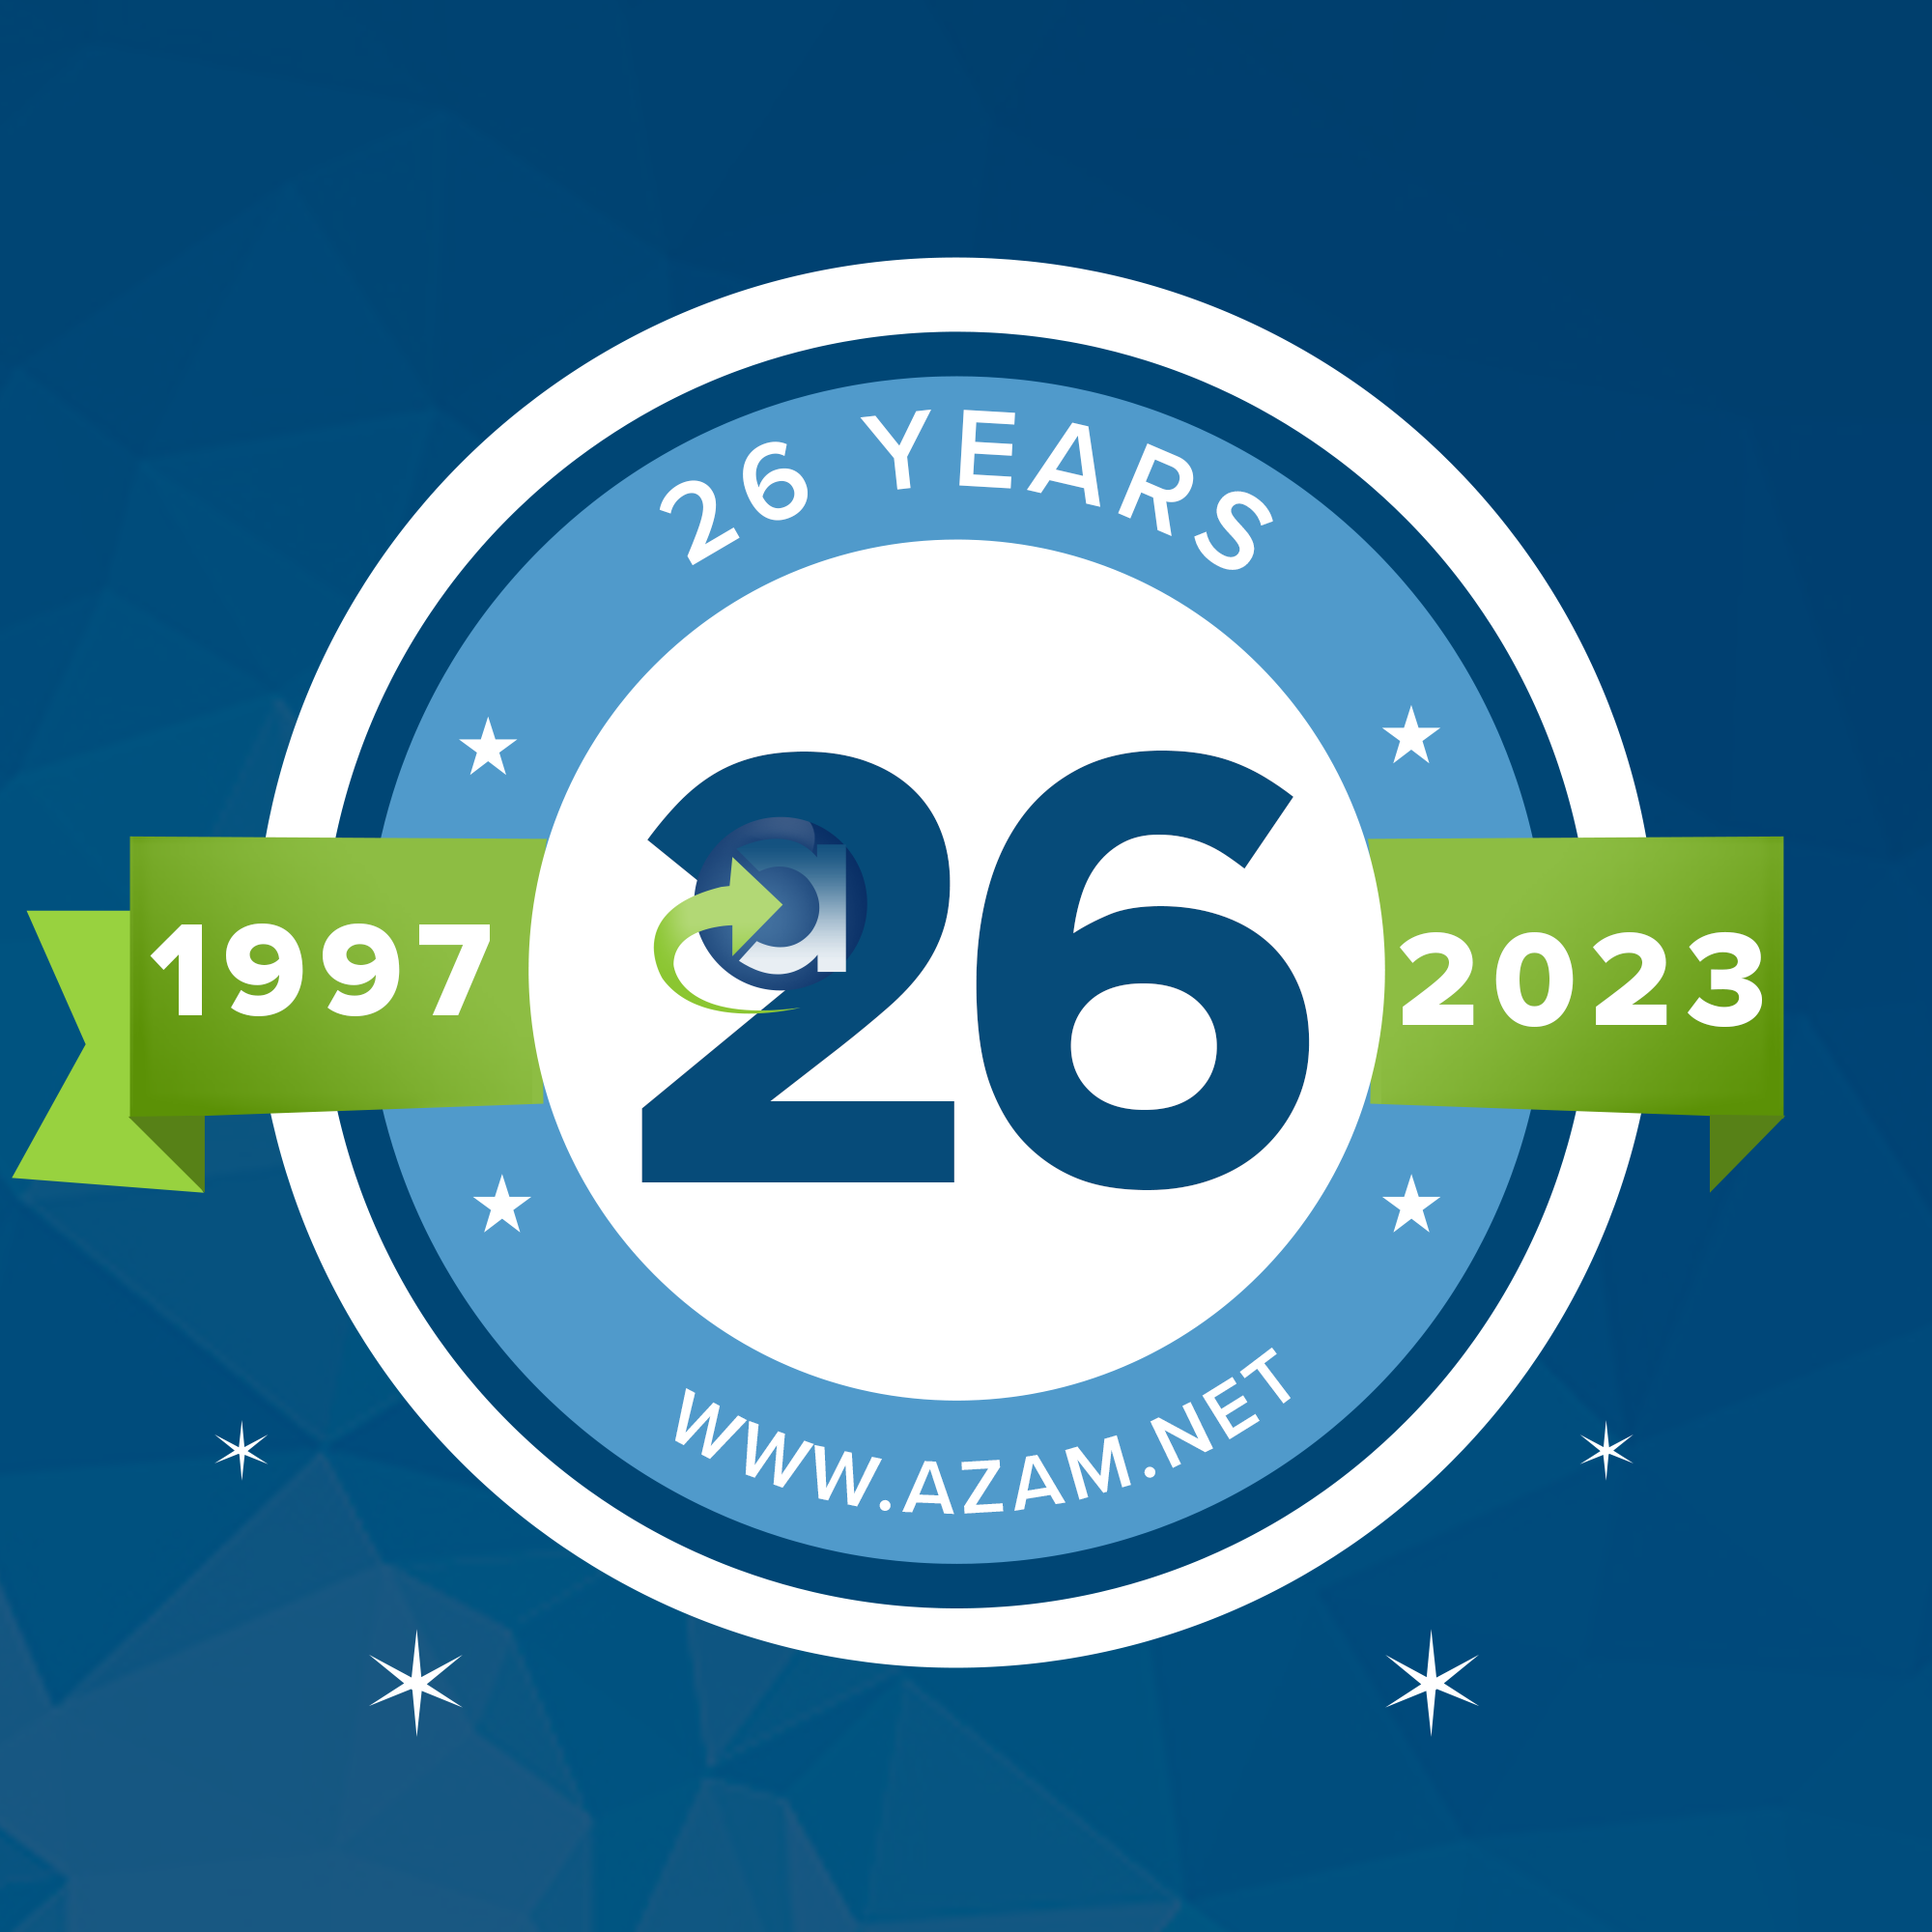 We are proud to be celebrating our milestone 26th anniversary. Why risk your time and money with less experienced agencies? Your work will usually be done by junior staff just learning the ropes and getting to understand what our experts already knew decades ago. Go here to contact us